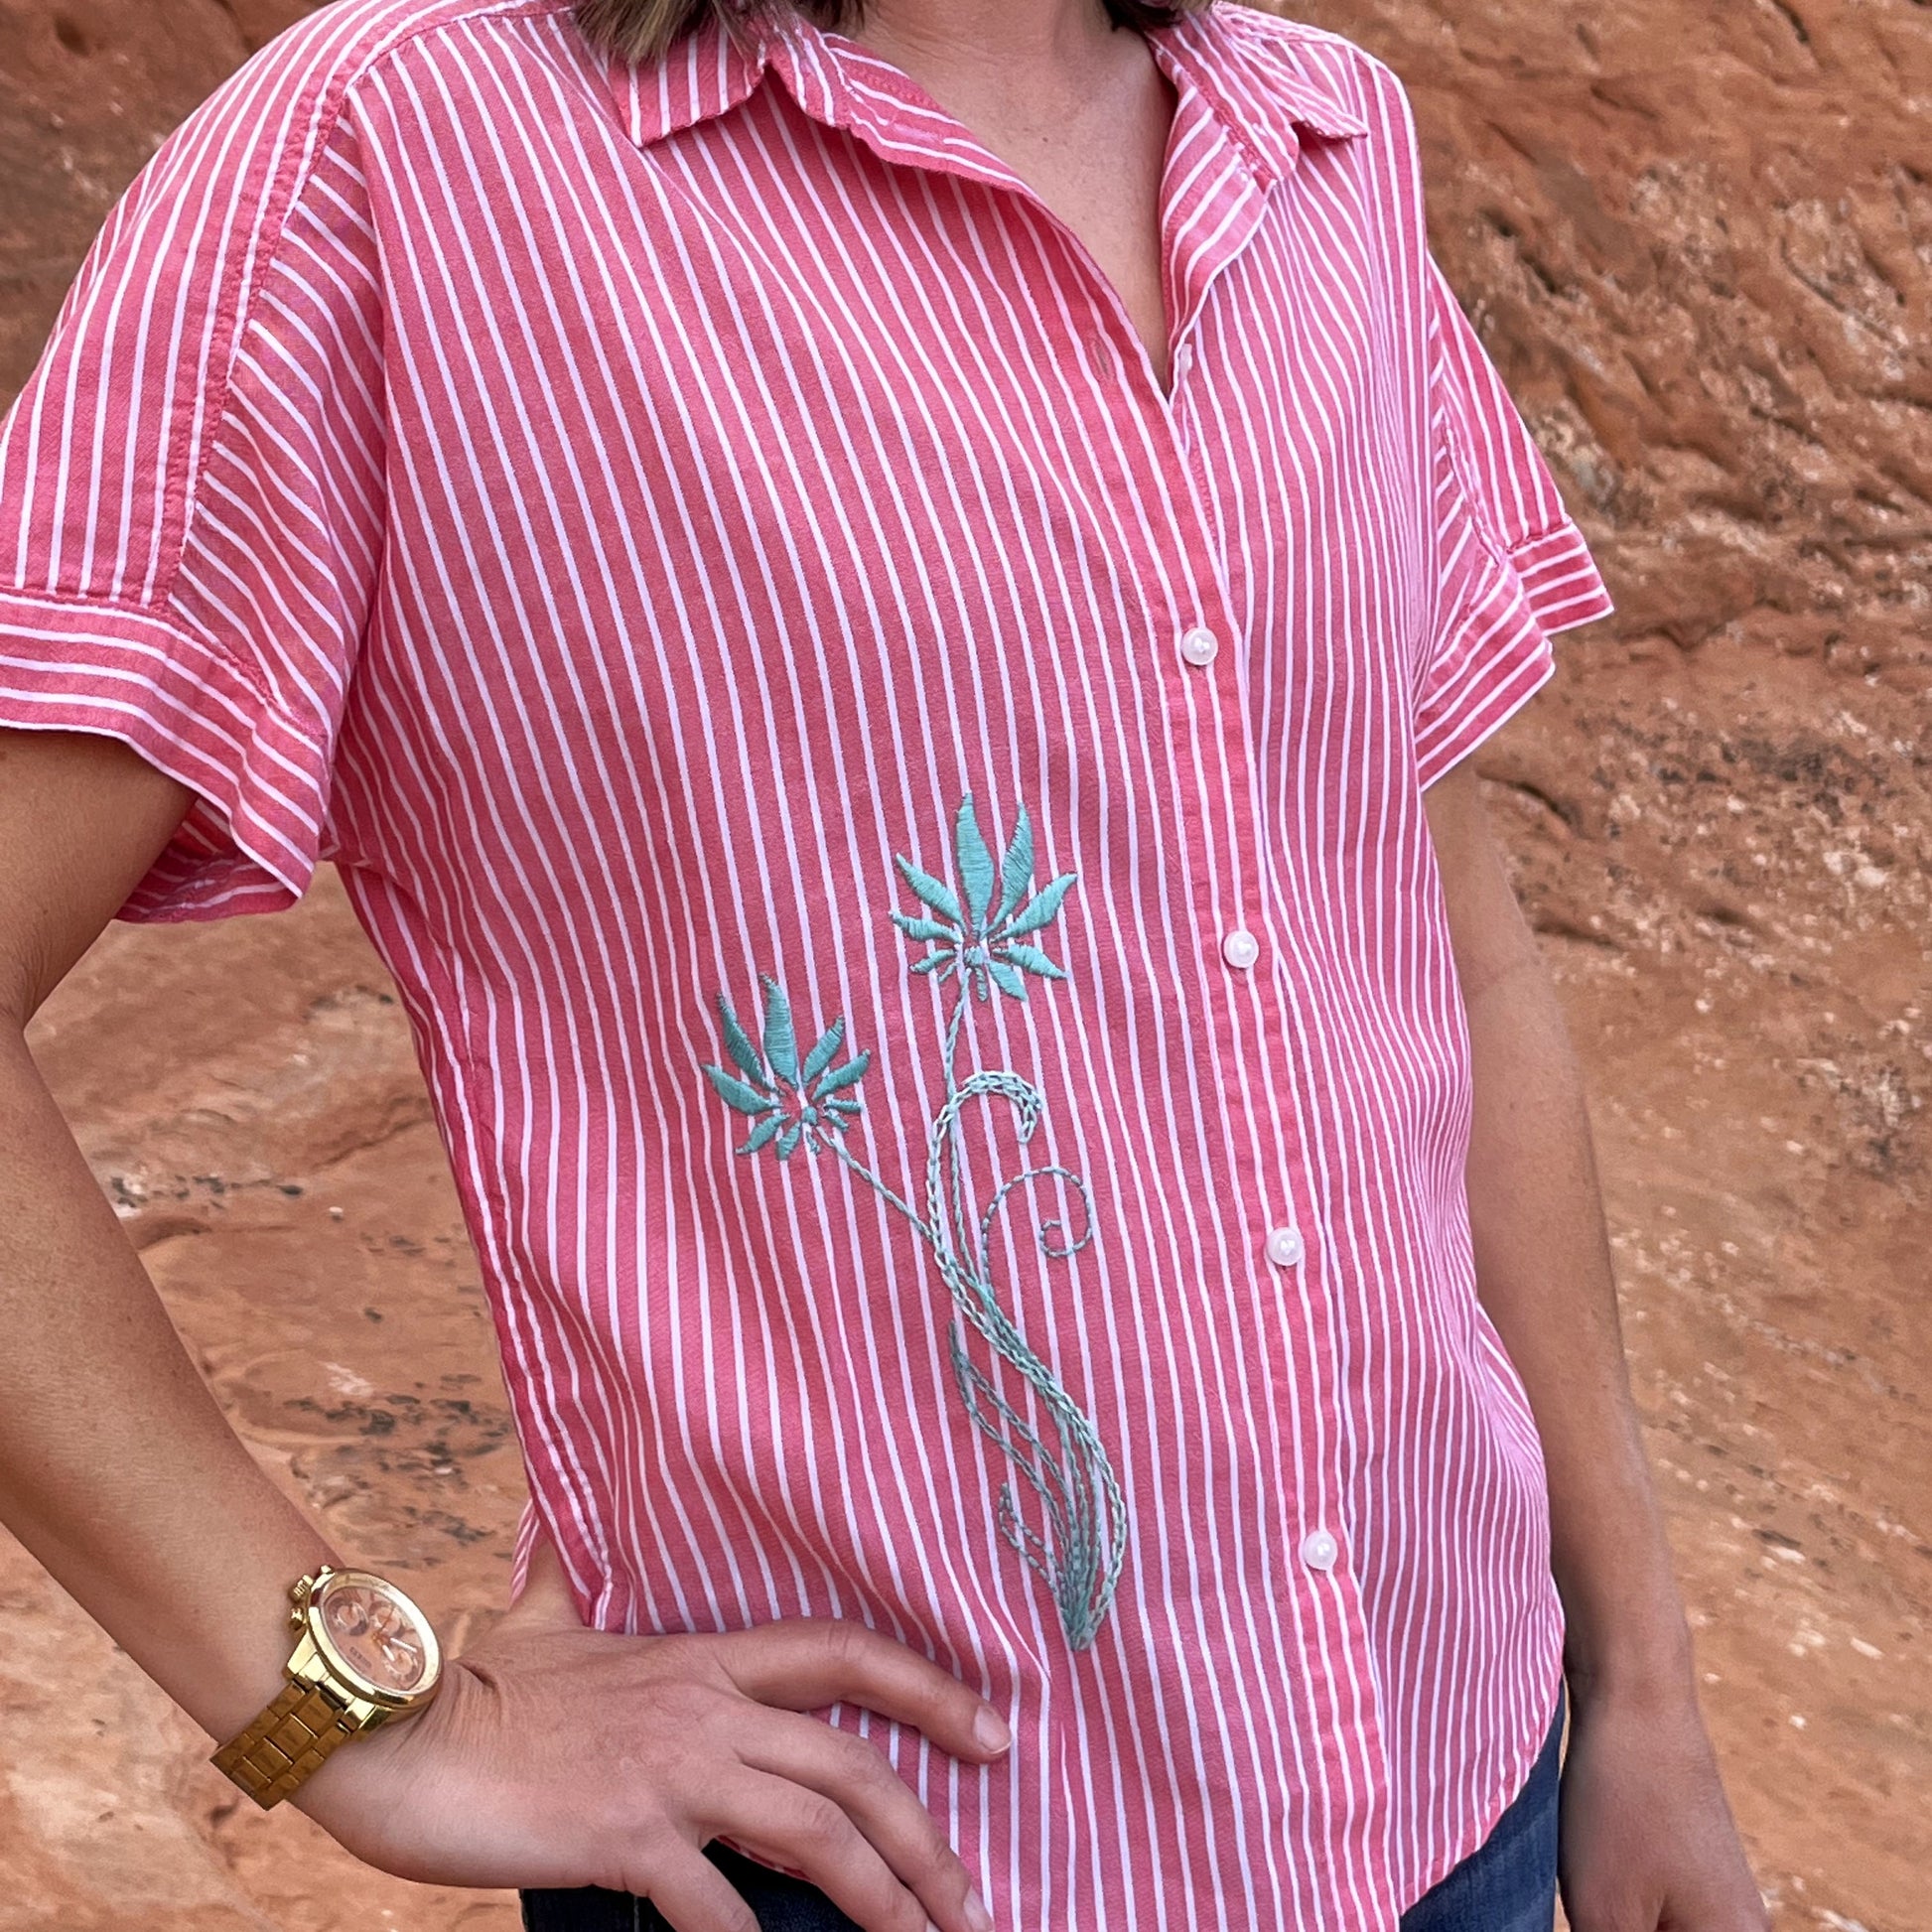 a woman's torso in a red and white striped button-up short sleeve shirt, with two hand embroidered long stemmed flowers in aqua on the lower front right side of the shirt, her right hand on her hip with a gold watch